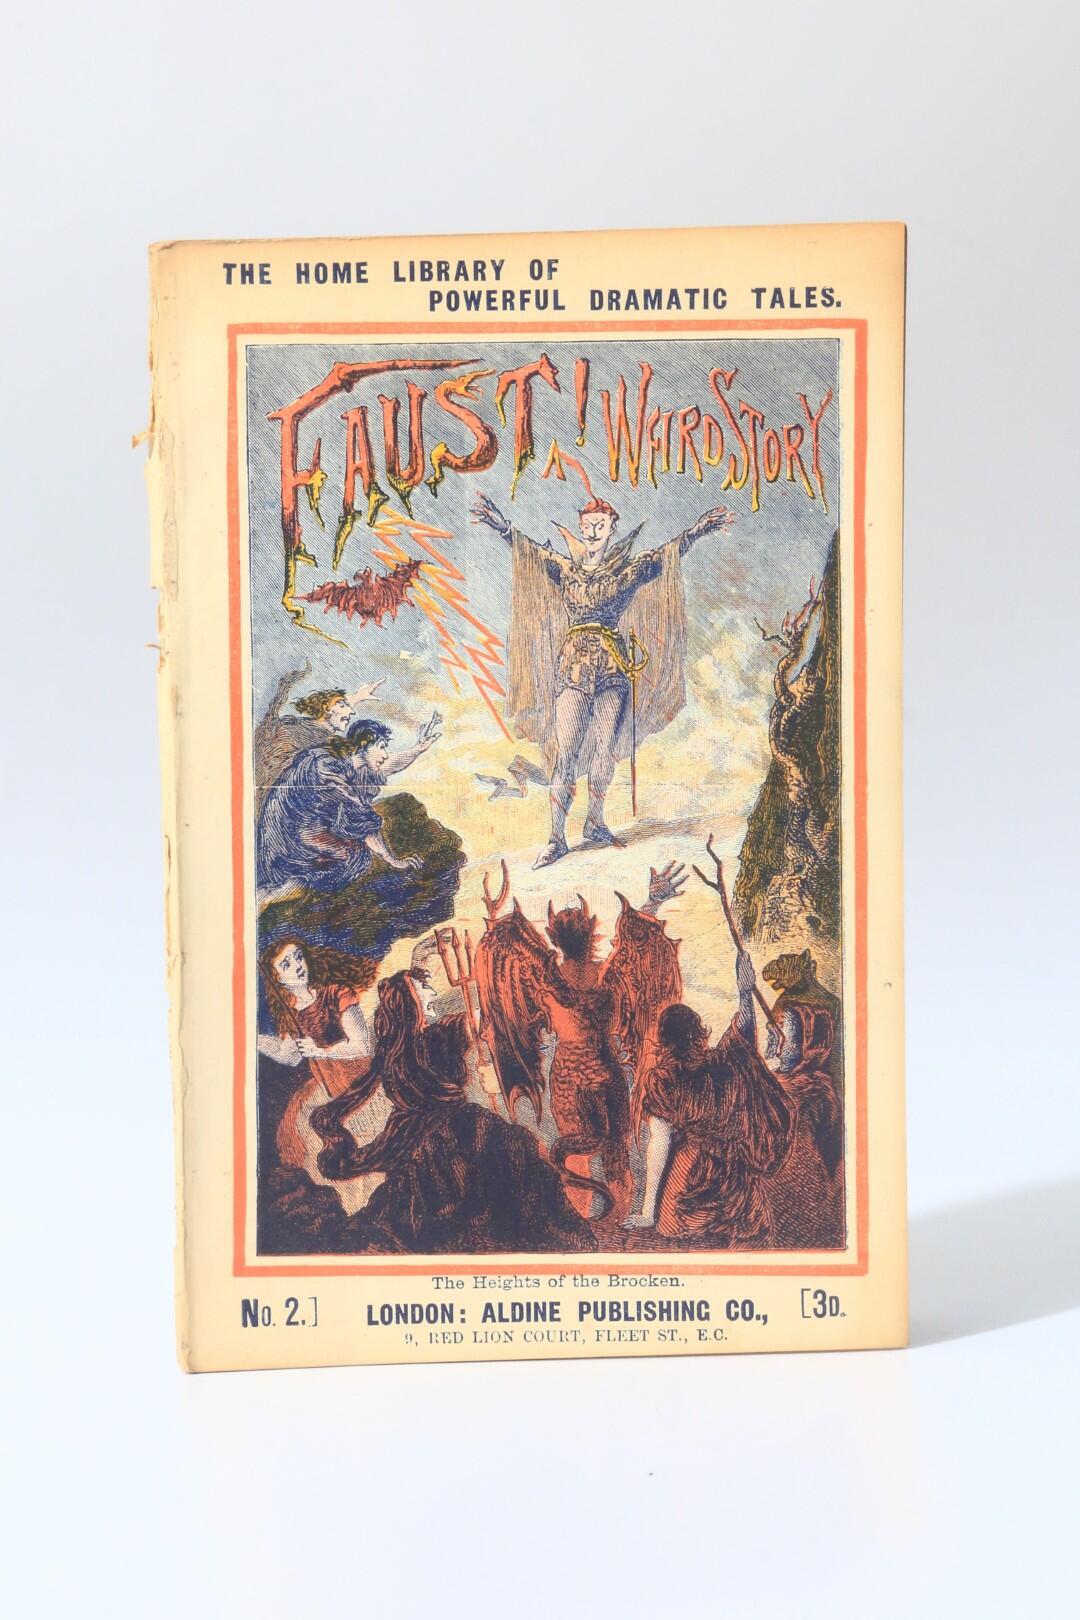 Alfred R. Phillips - Faust: A Weird Story - Aldine Publishing, nd [c1890], First Edition.